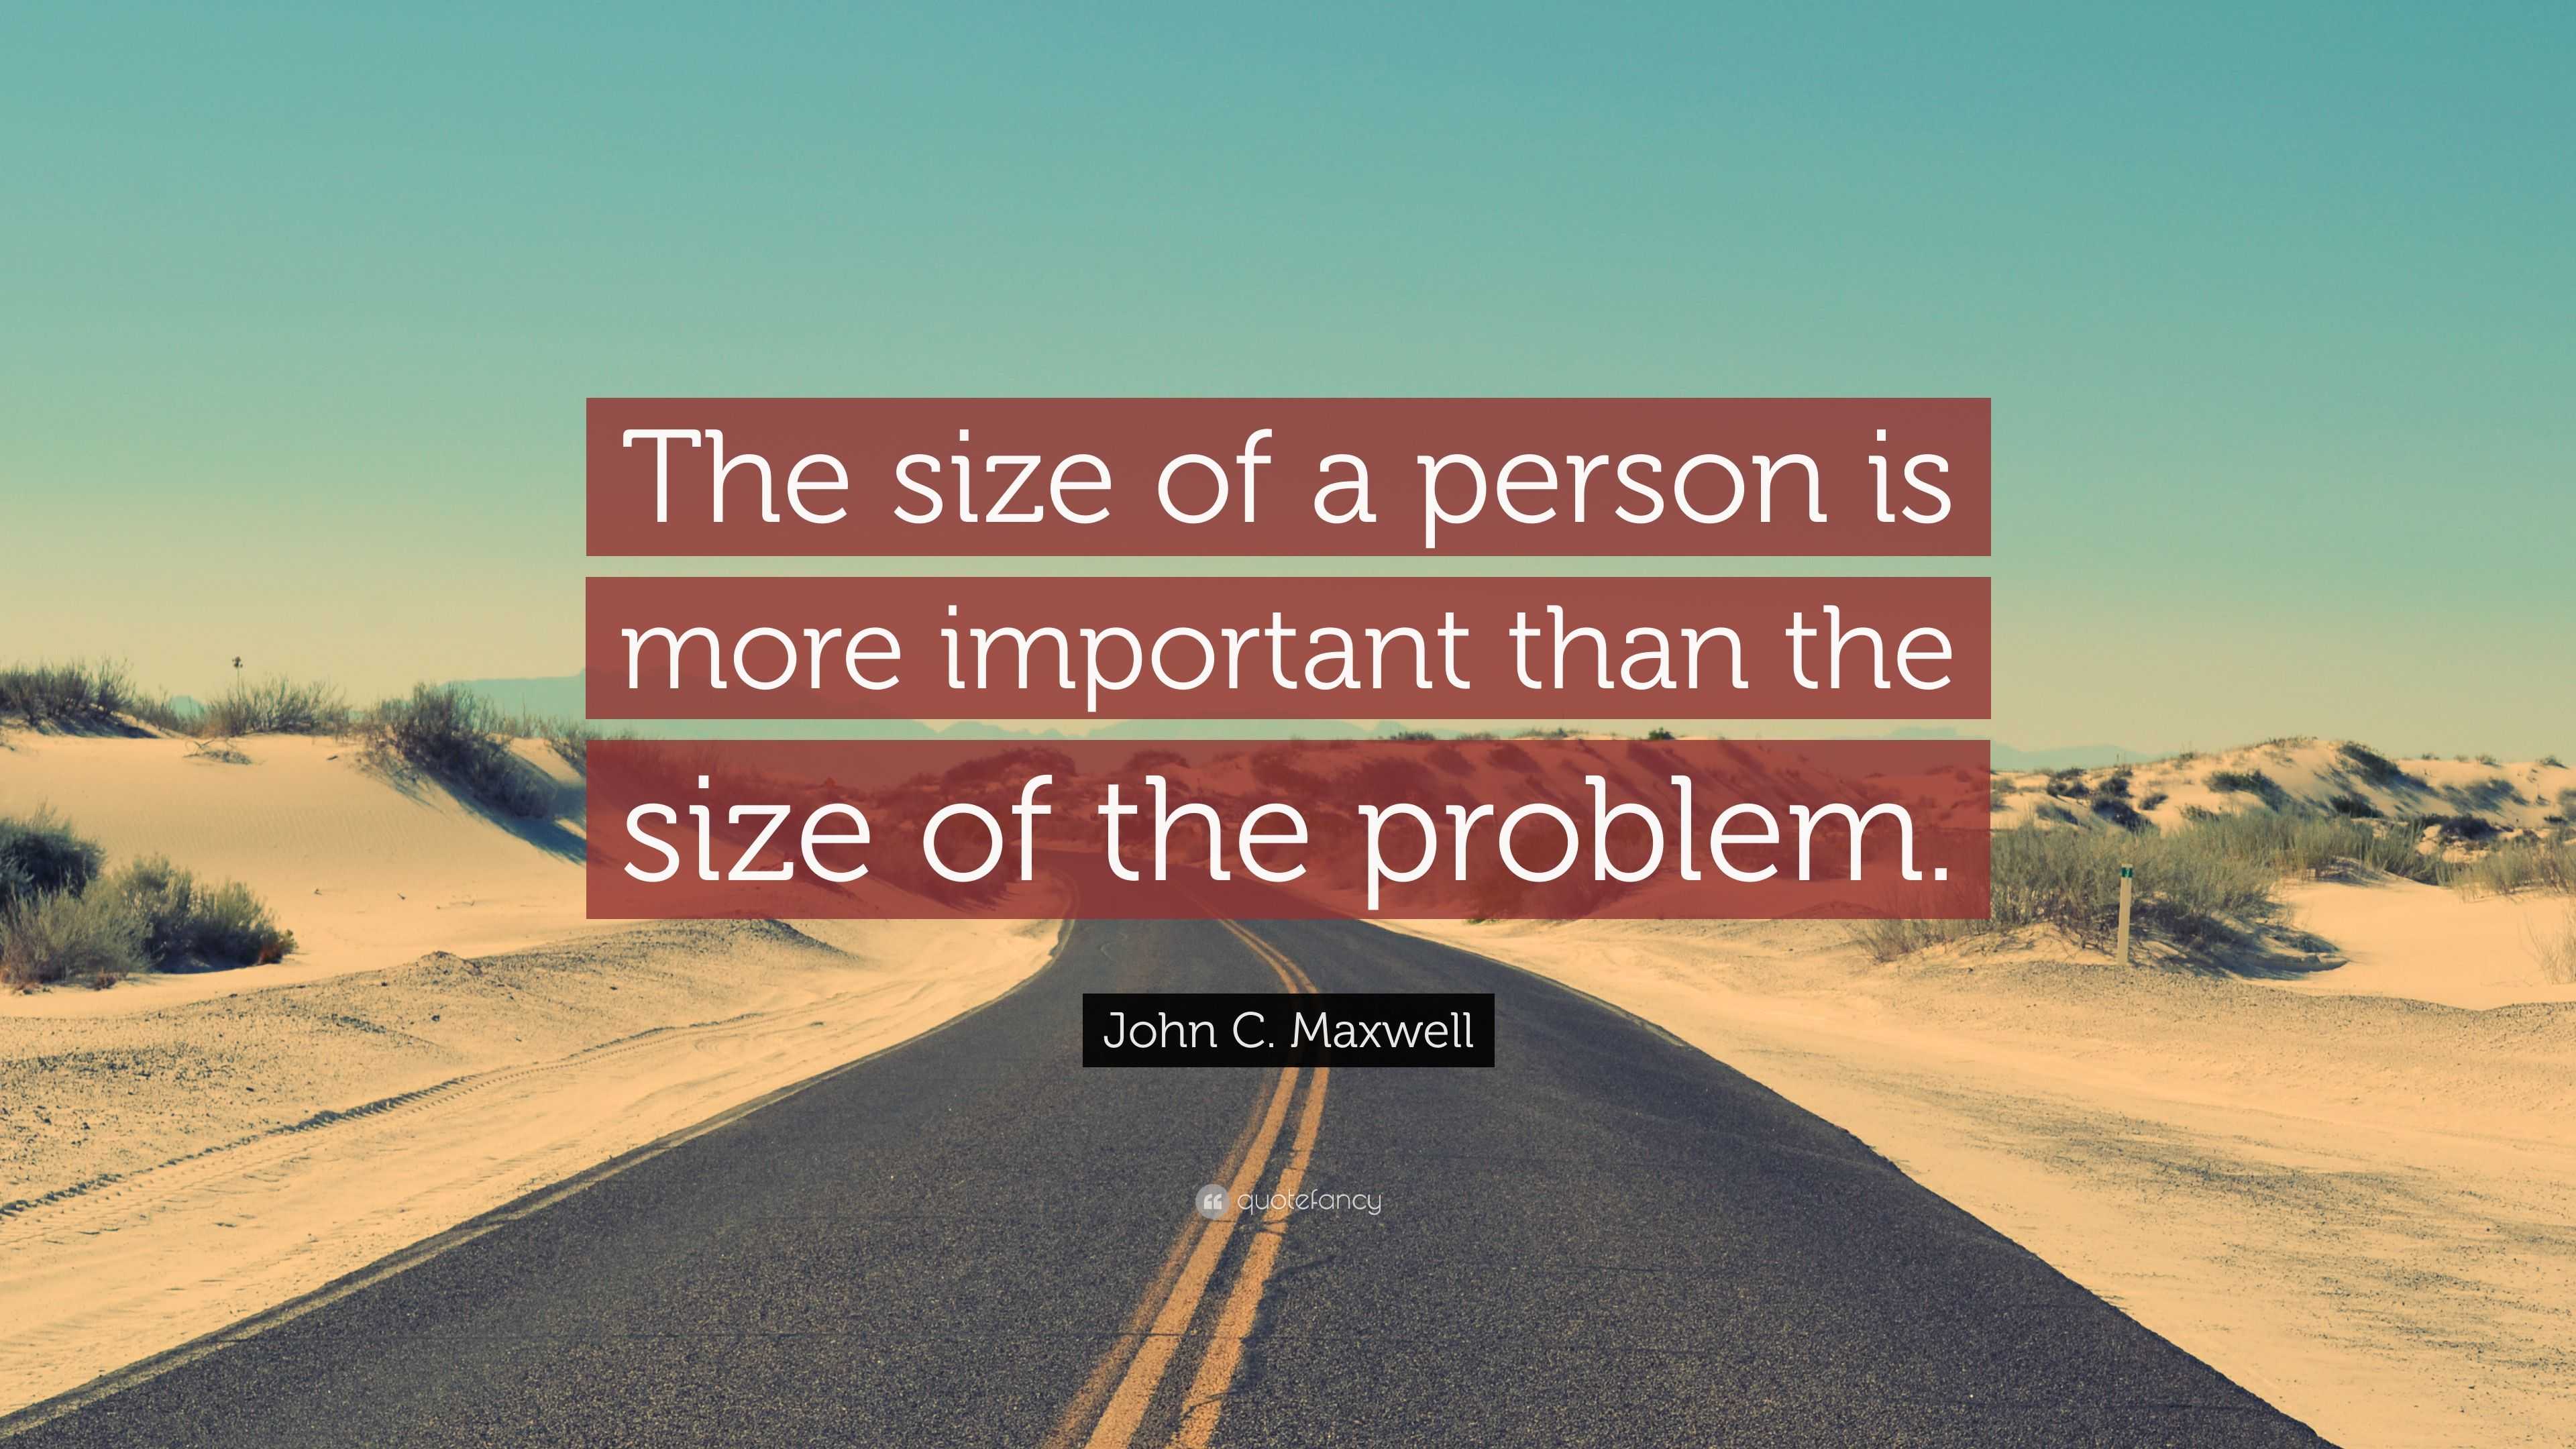 John C. Maxwell Quote: “The size of a person is more important than the